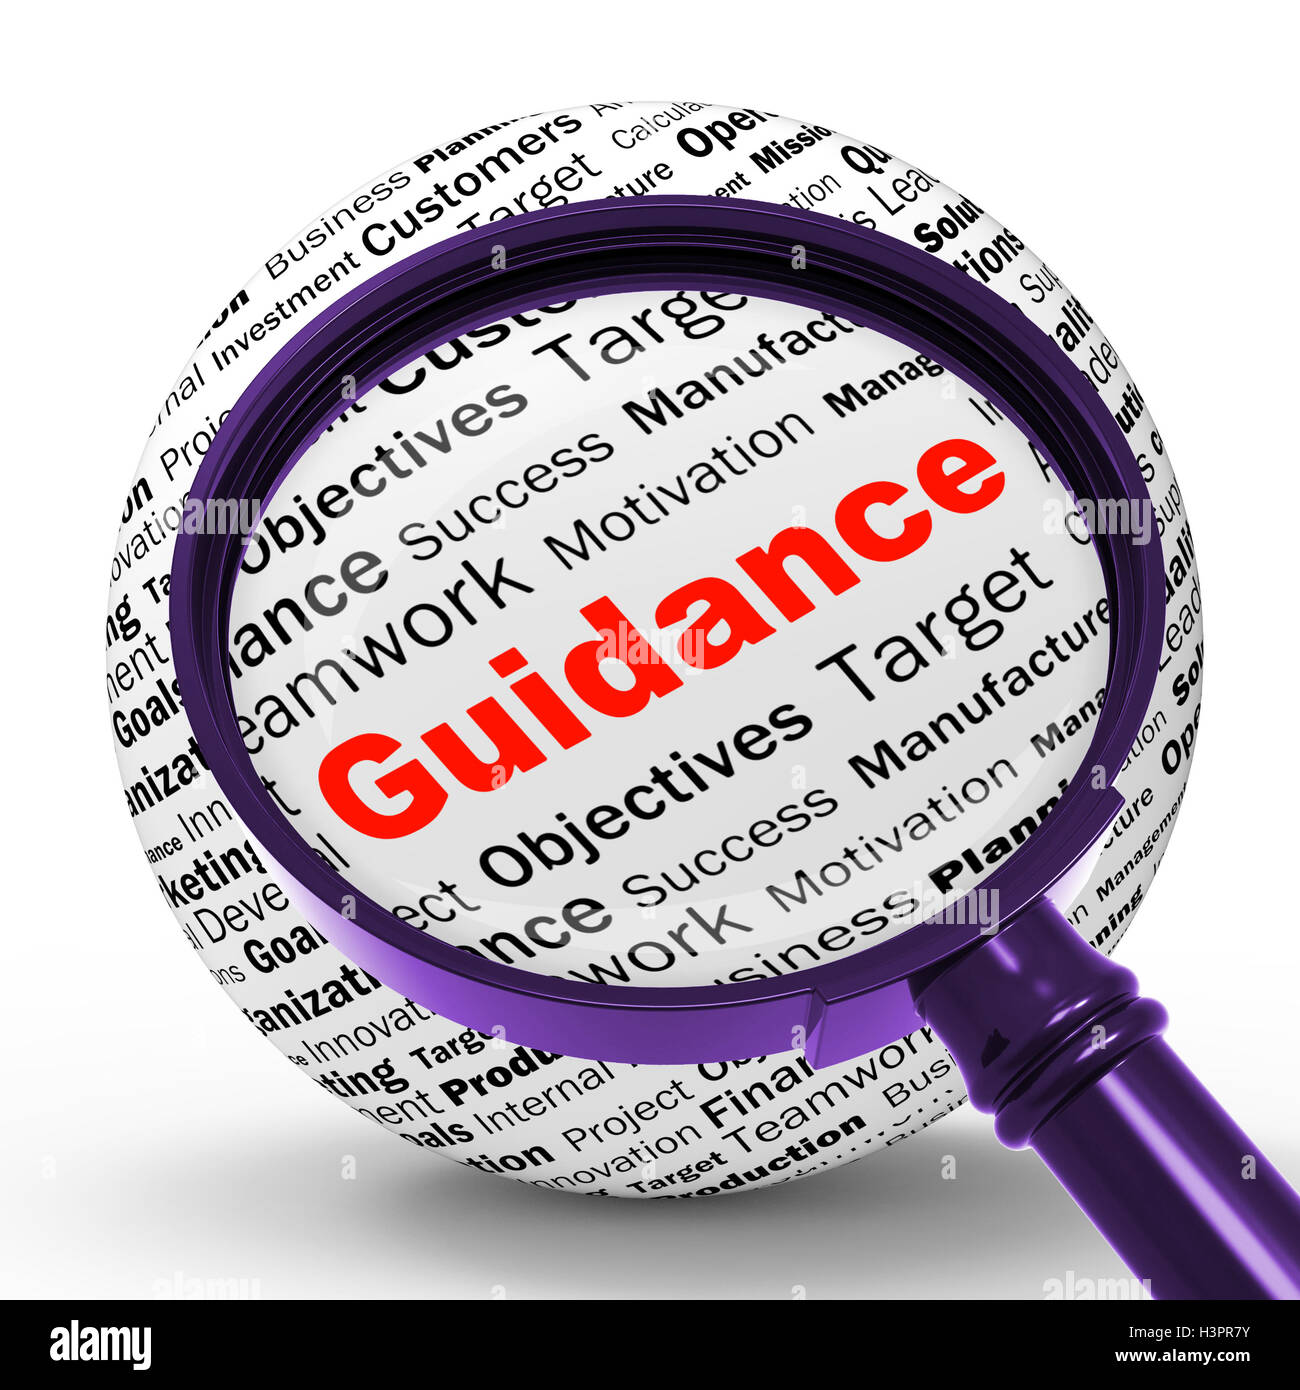 Guidance Magnifier Definition Means Counselling And Help Stock Photo